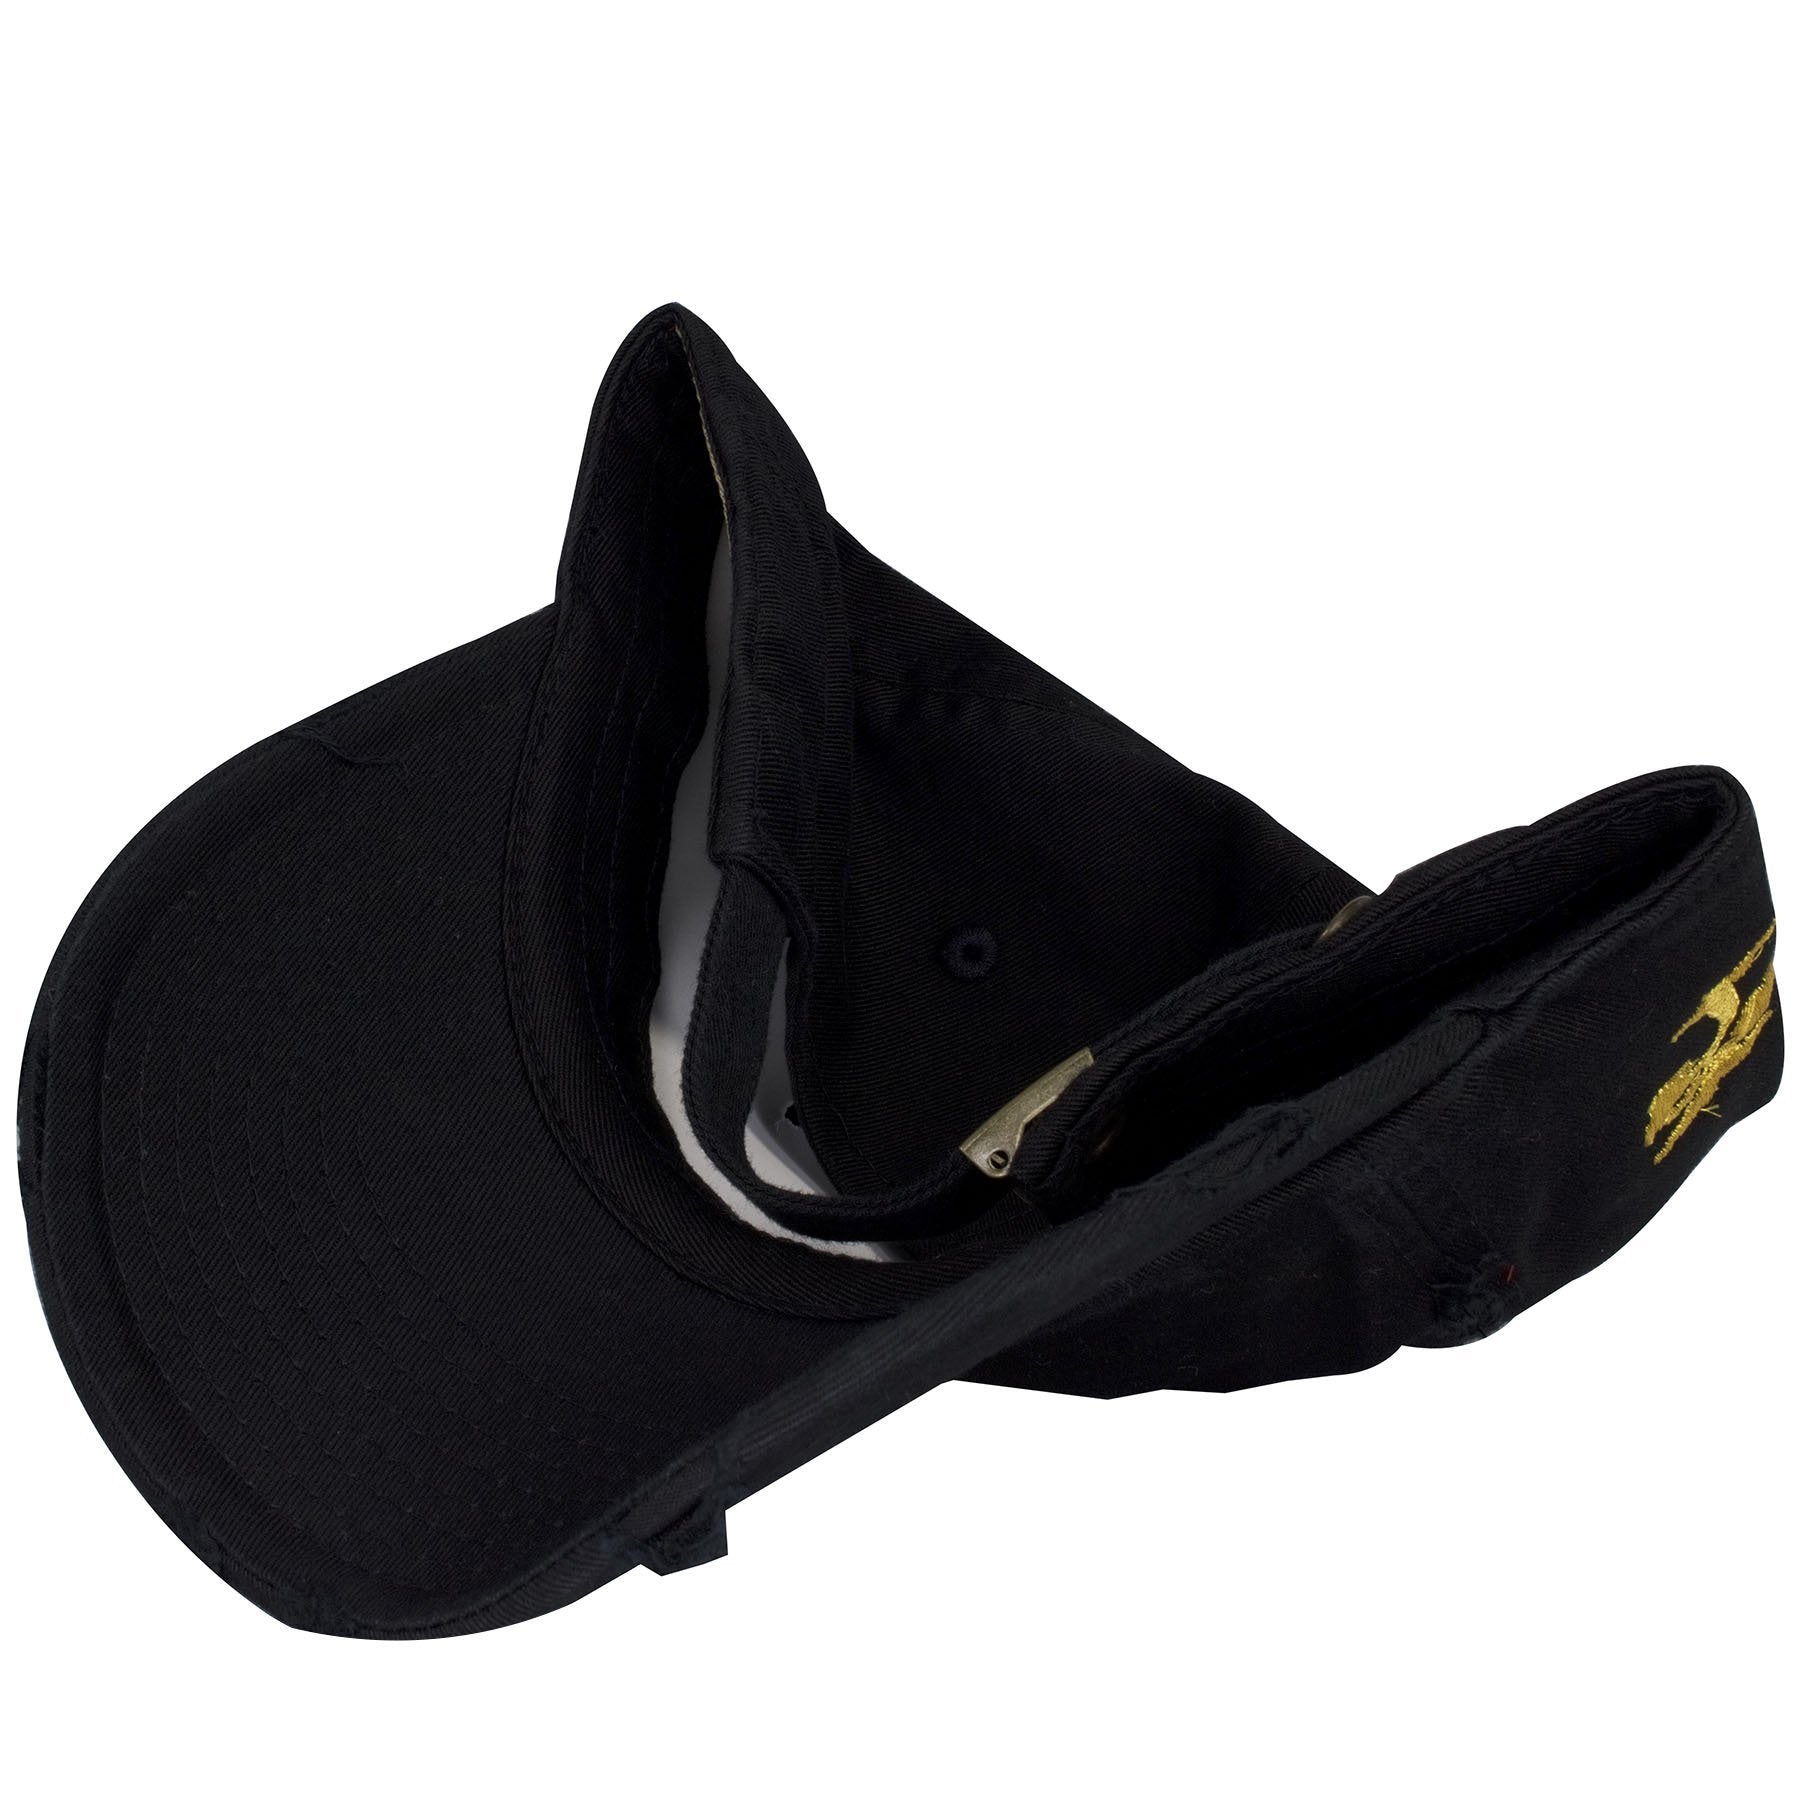 the under brim of the golden foams sneaker matching distressed dad hat is black